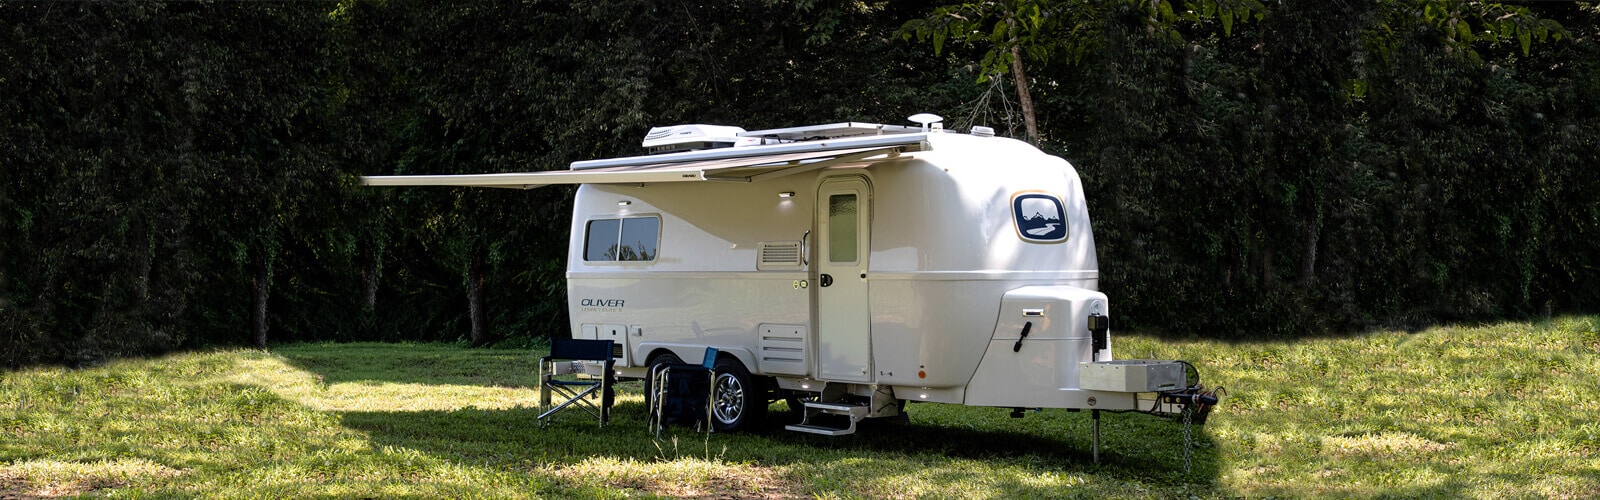 How to Choose the Right Travel Trailer For You